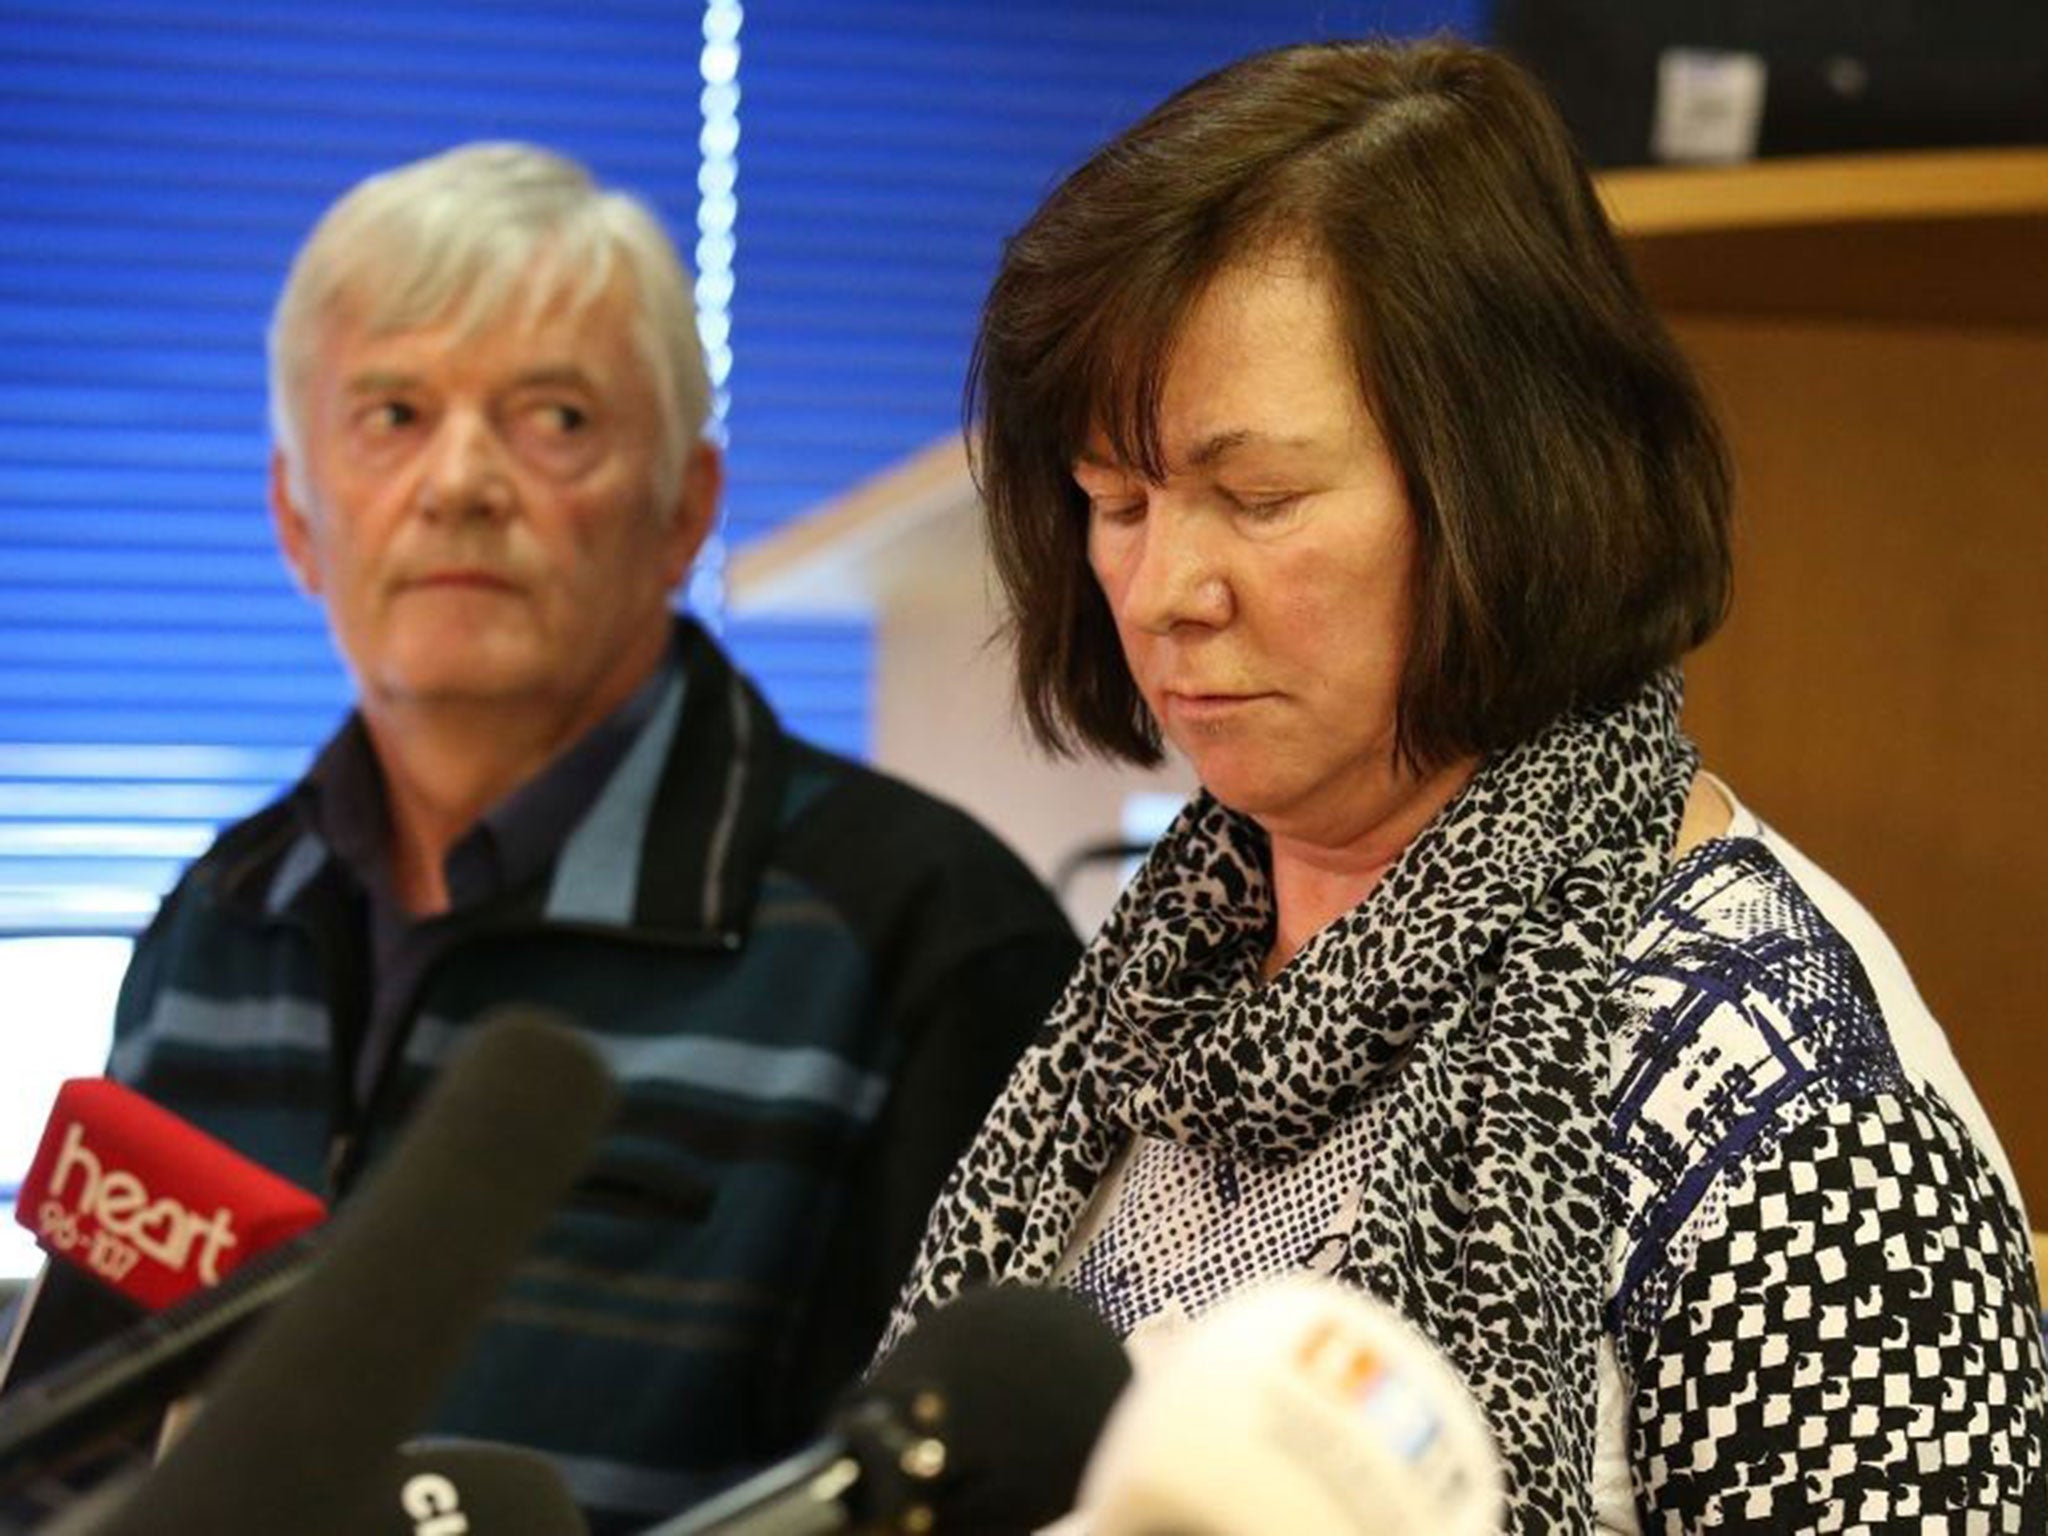 Marian and John Buckley, parents of missing Karen Buckley, at a press conference in Glasgow.